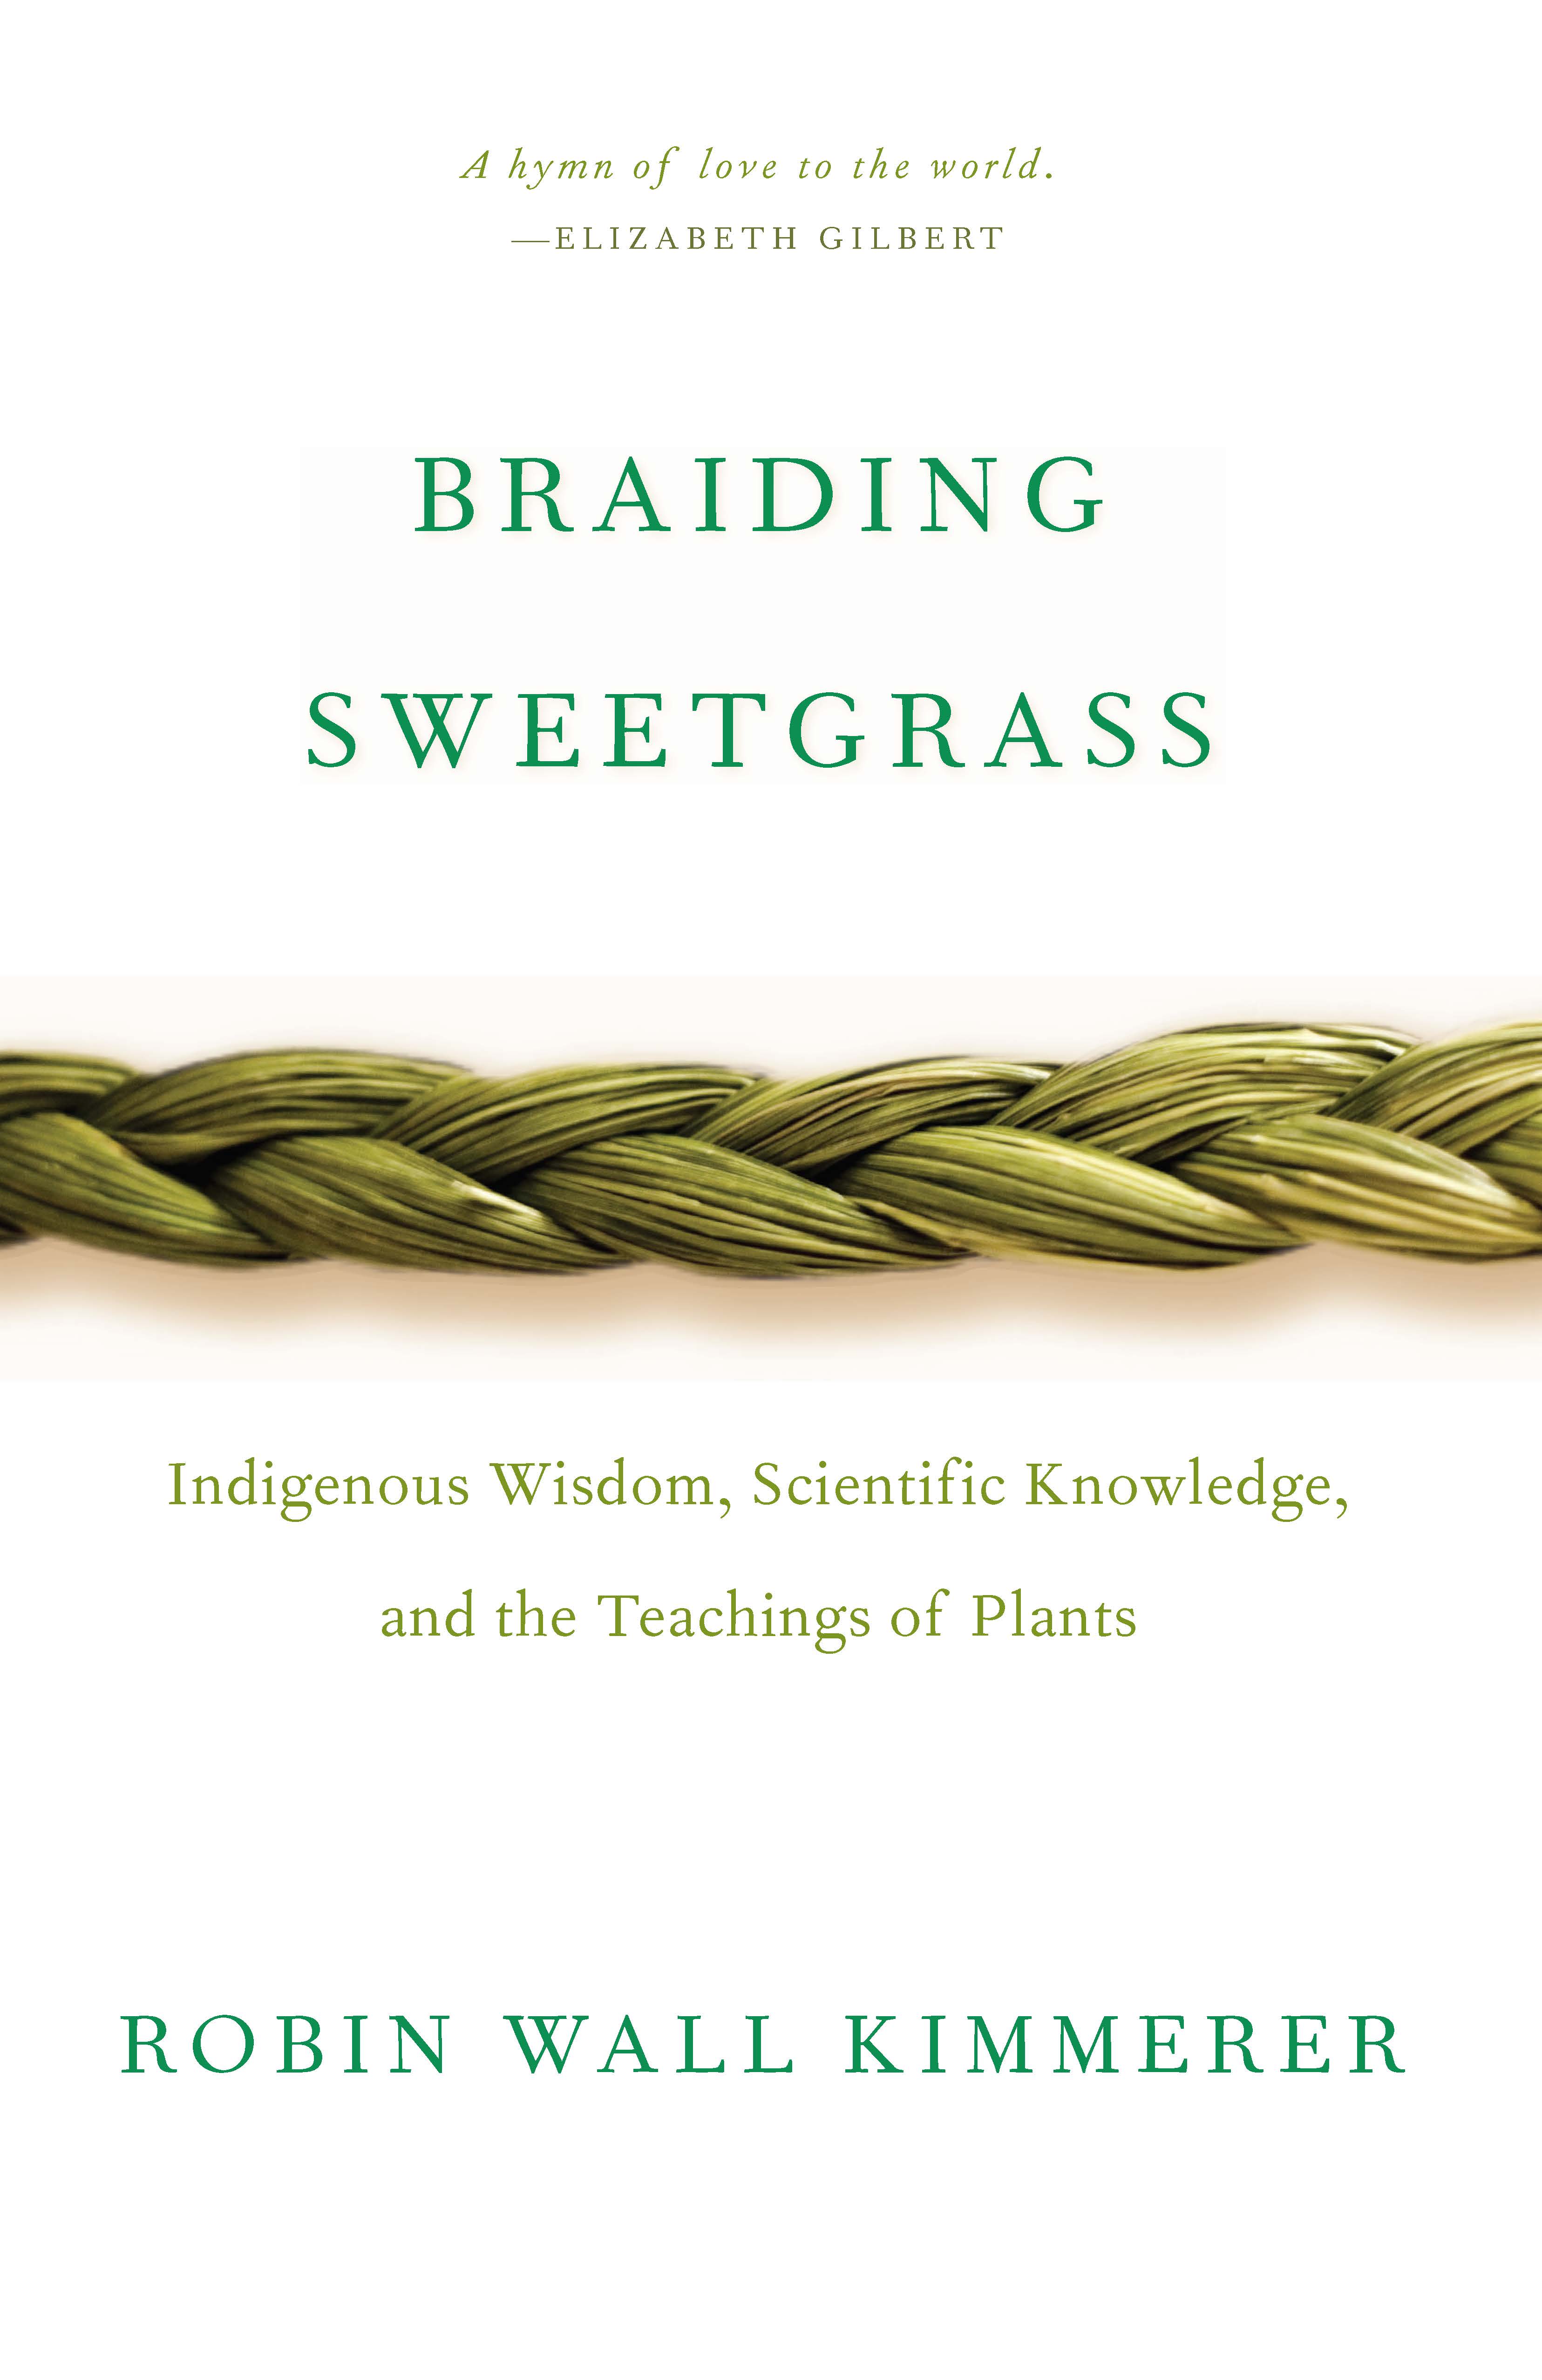 Braiding Sweetgrass [electronic resource] : Indigenous Wisdom, Scientific Knowledge and the Teachings of Plants